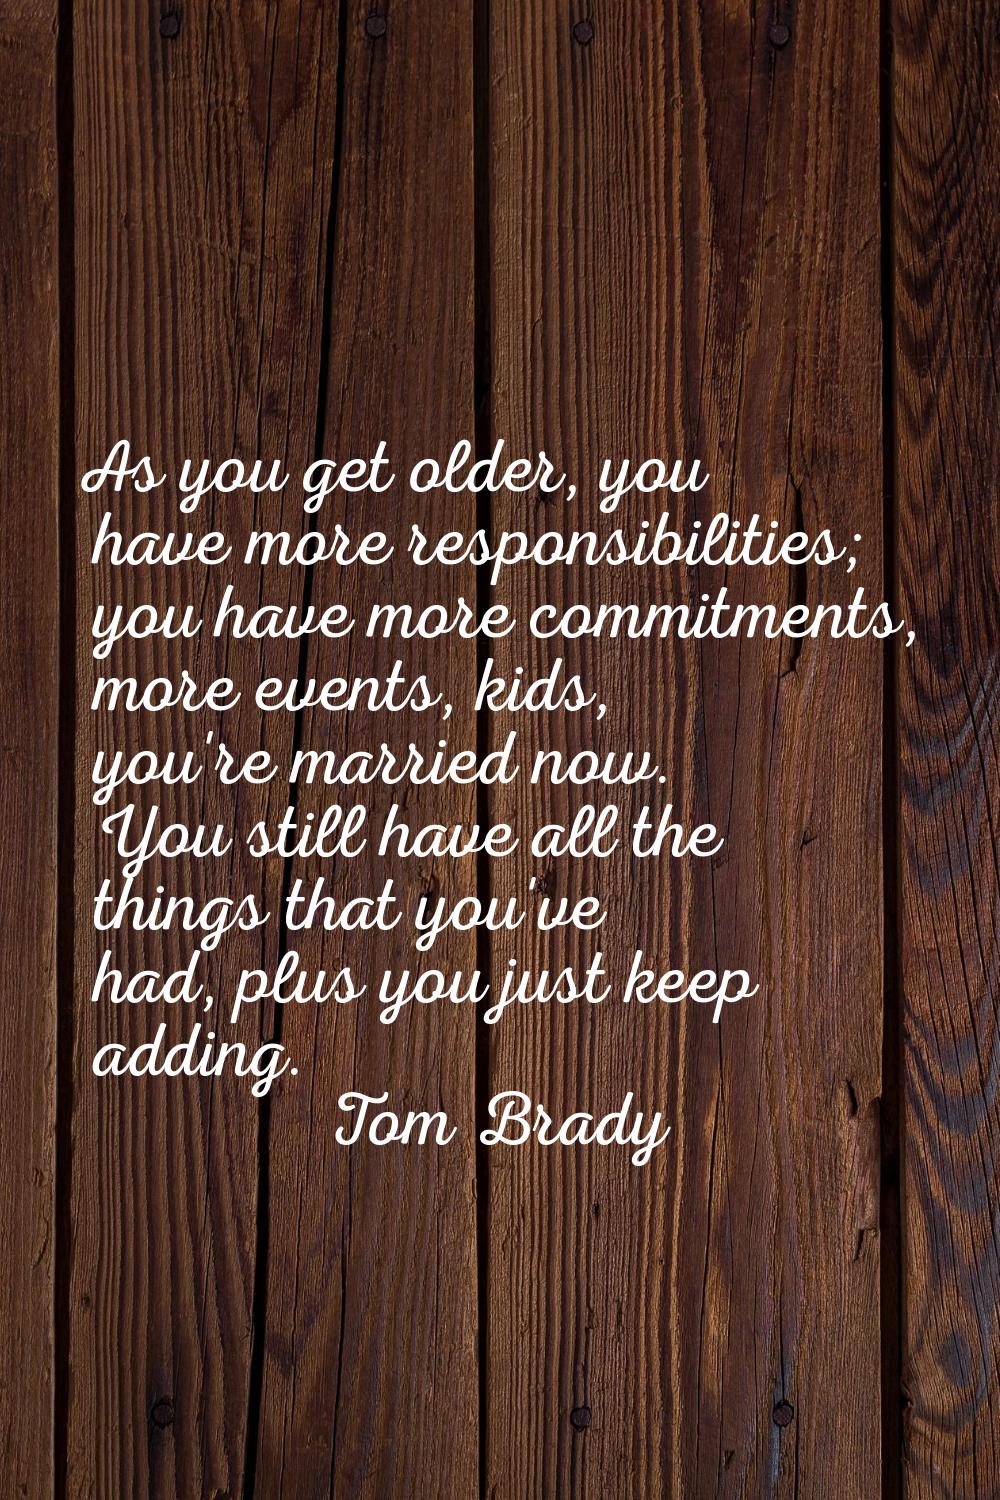 As you get older, you have more responsibilities; you have more commitments, more events, kids, you